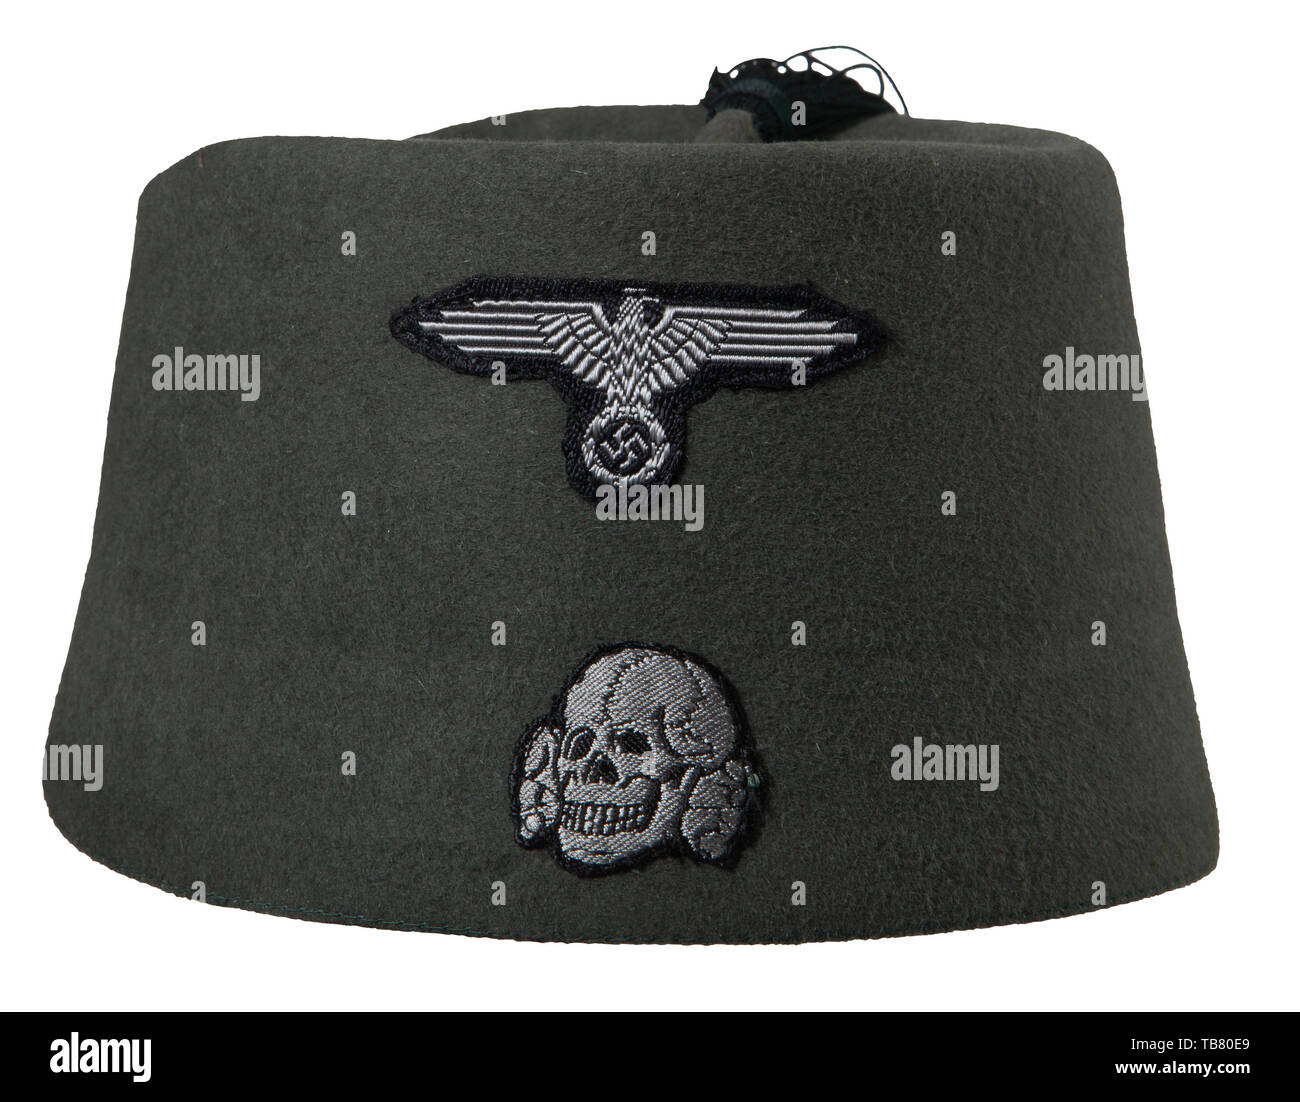 THE JOHN PEPERA COLLECTION, A Fez of the Waffen SS, Green-grey wool body with dark green tassel still tacked in rear, machine applied BeVo insignia, black leather sweatband and black ink stamped size '57'., Editorial-Use-Only Stock Photo